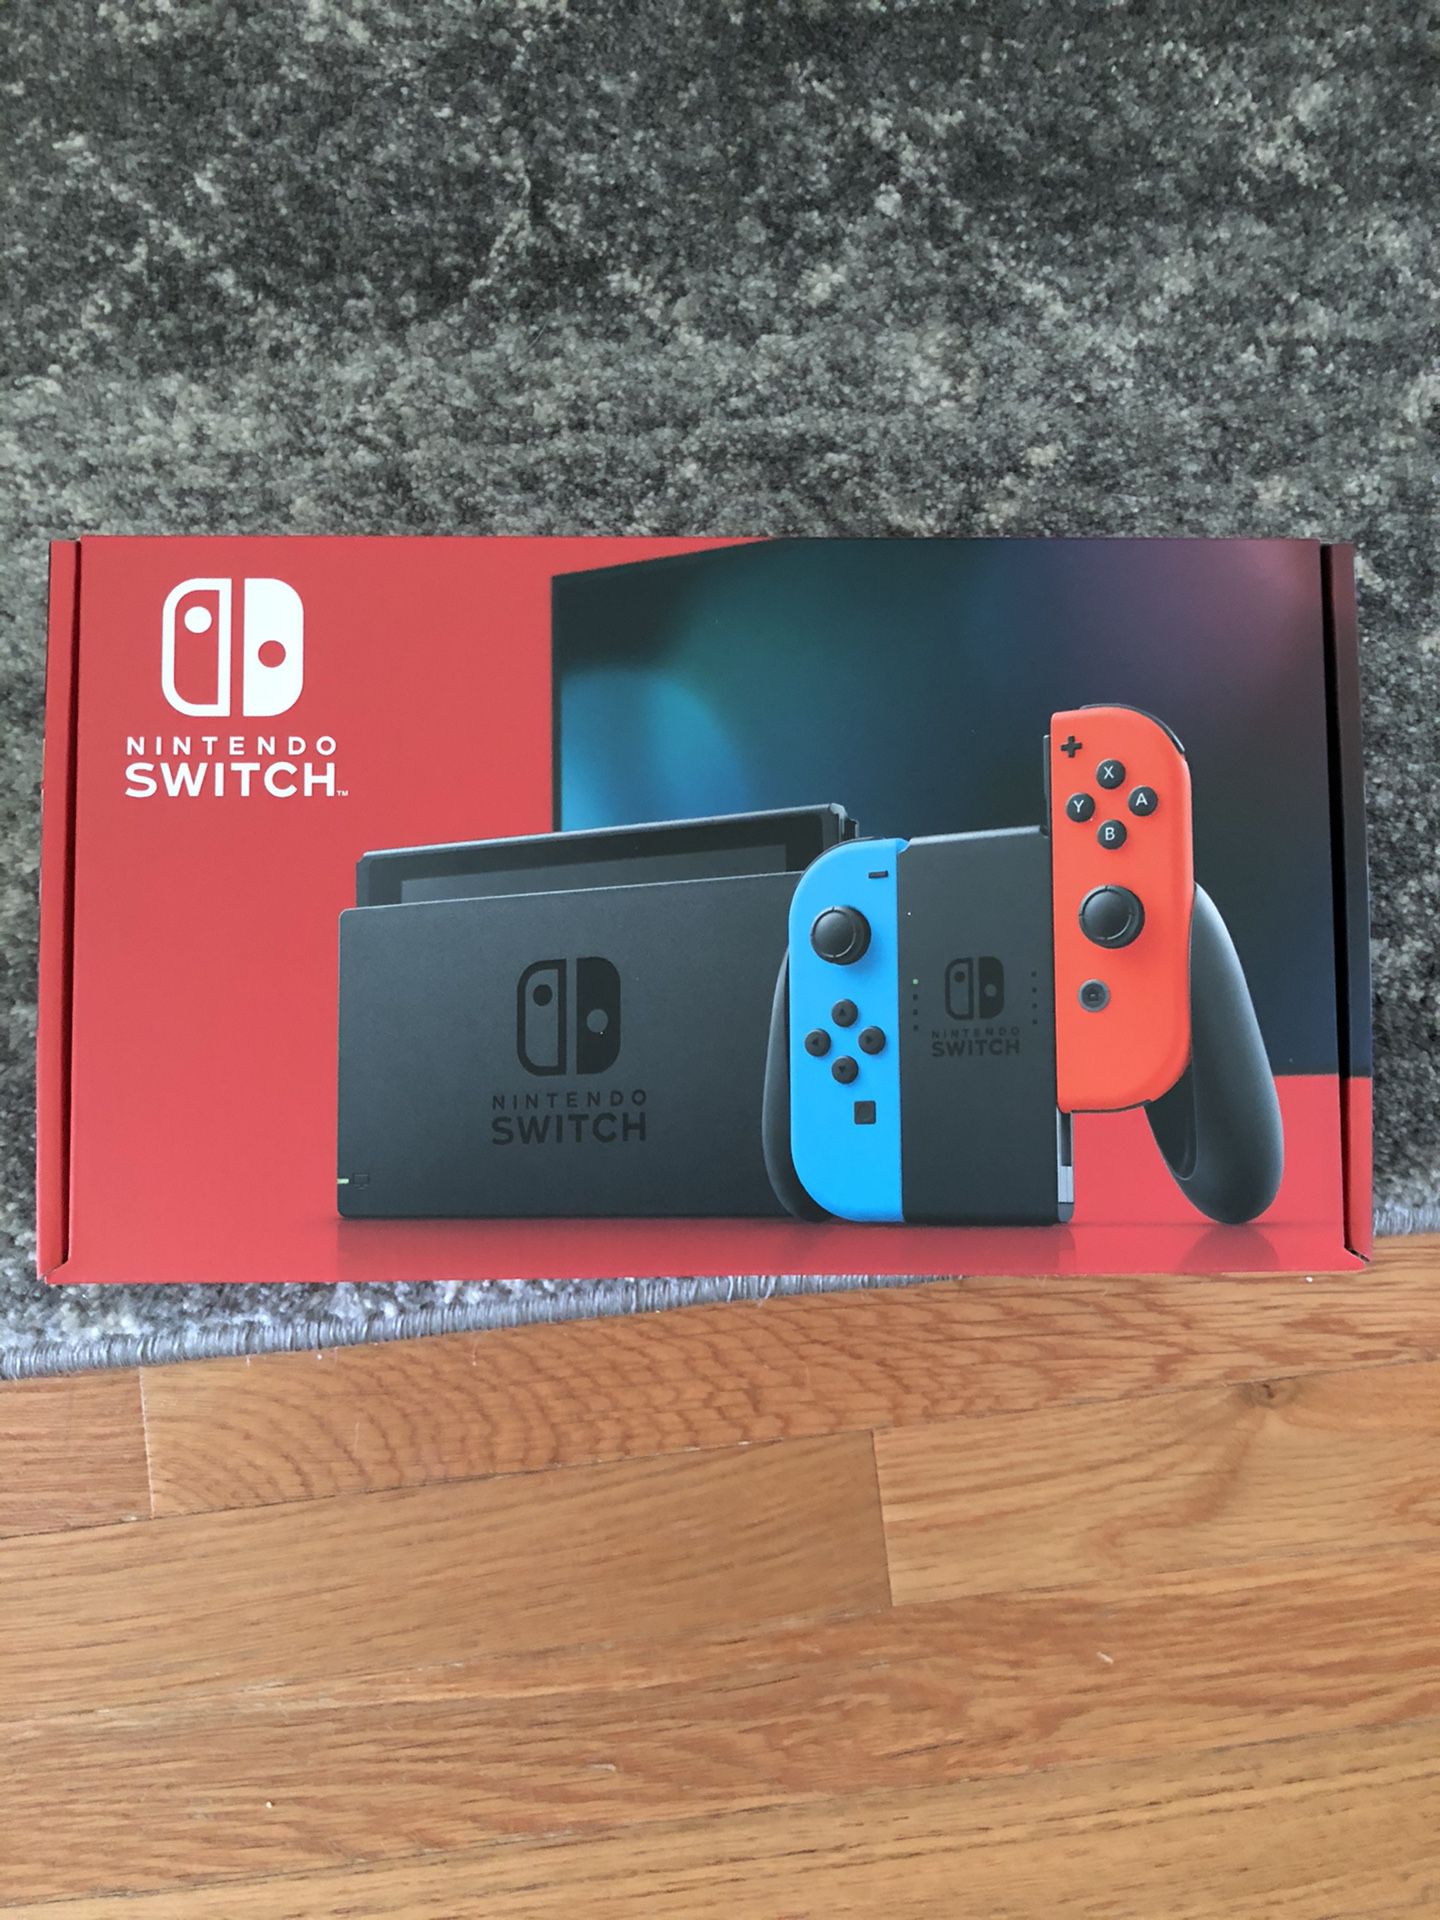 Nintendo Switch V2 Neon Red and Blue